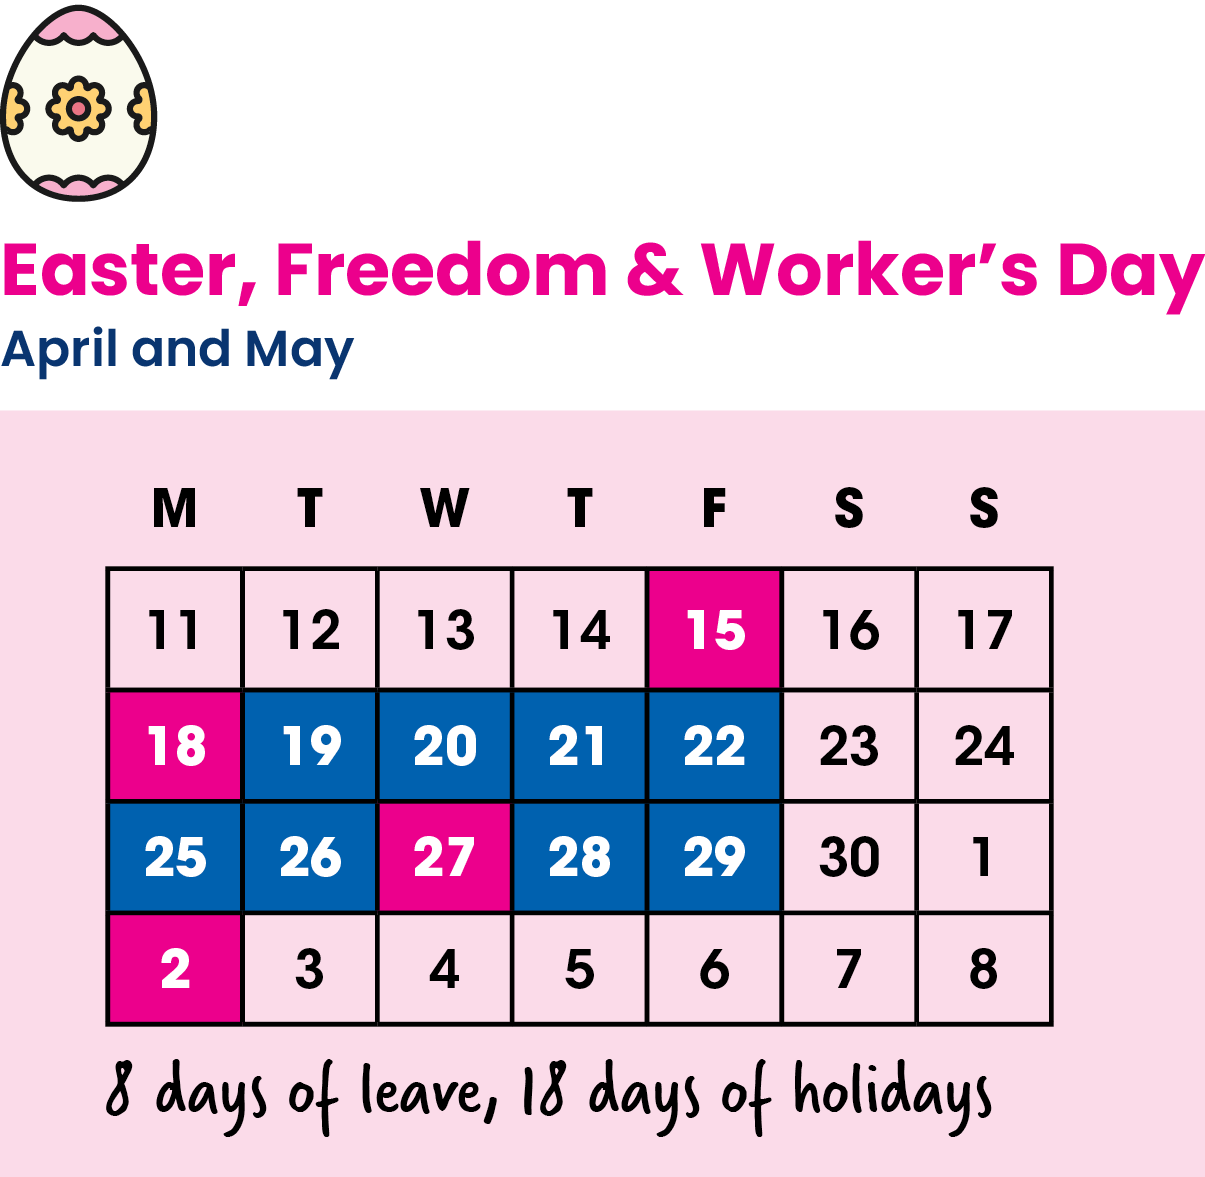 April and May 2022 - Easter Weekend, Freedom Day, and Workers Day Holiday Hacks